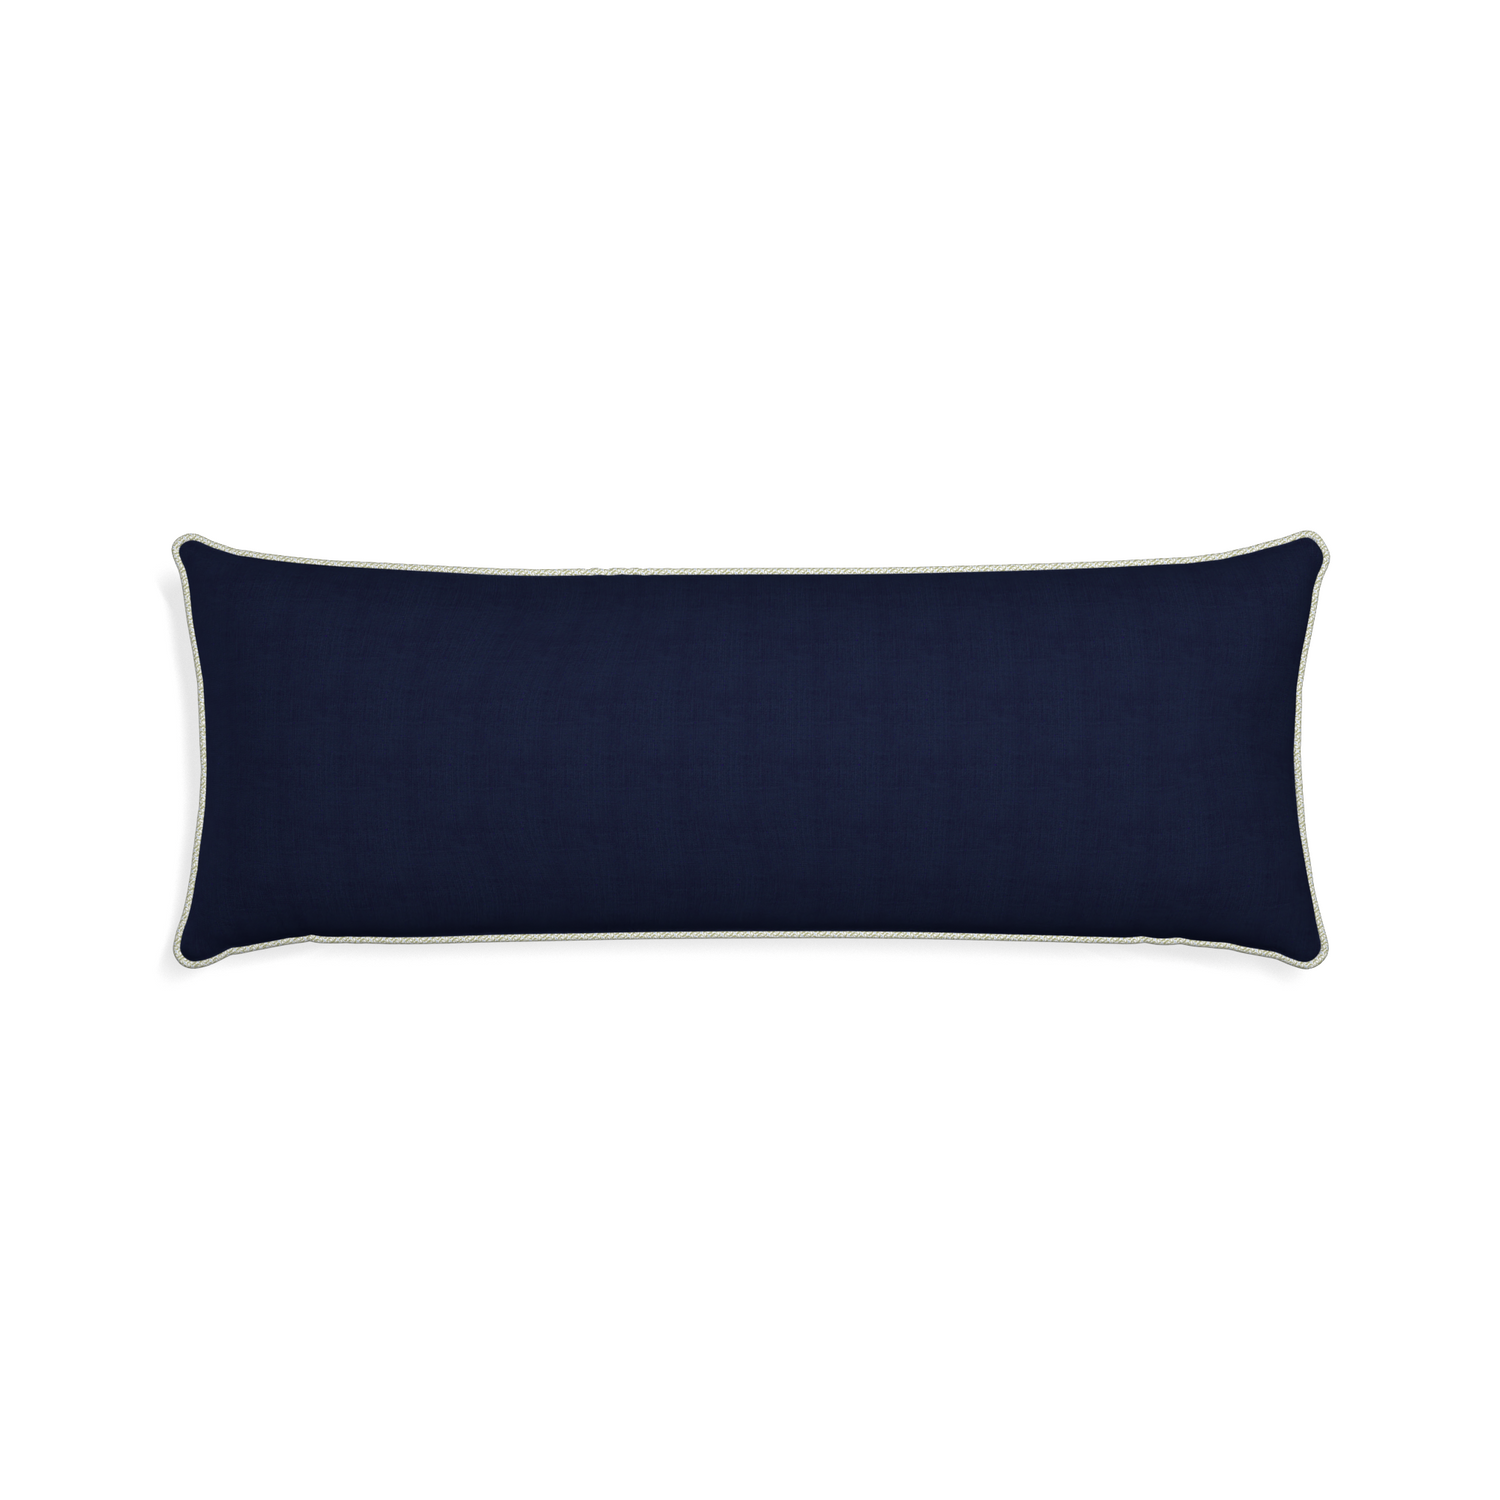 Xl-lumbar midnight custom pillow with l piping on white background